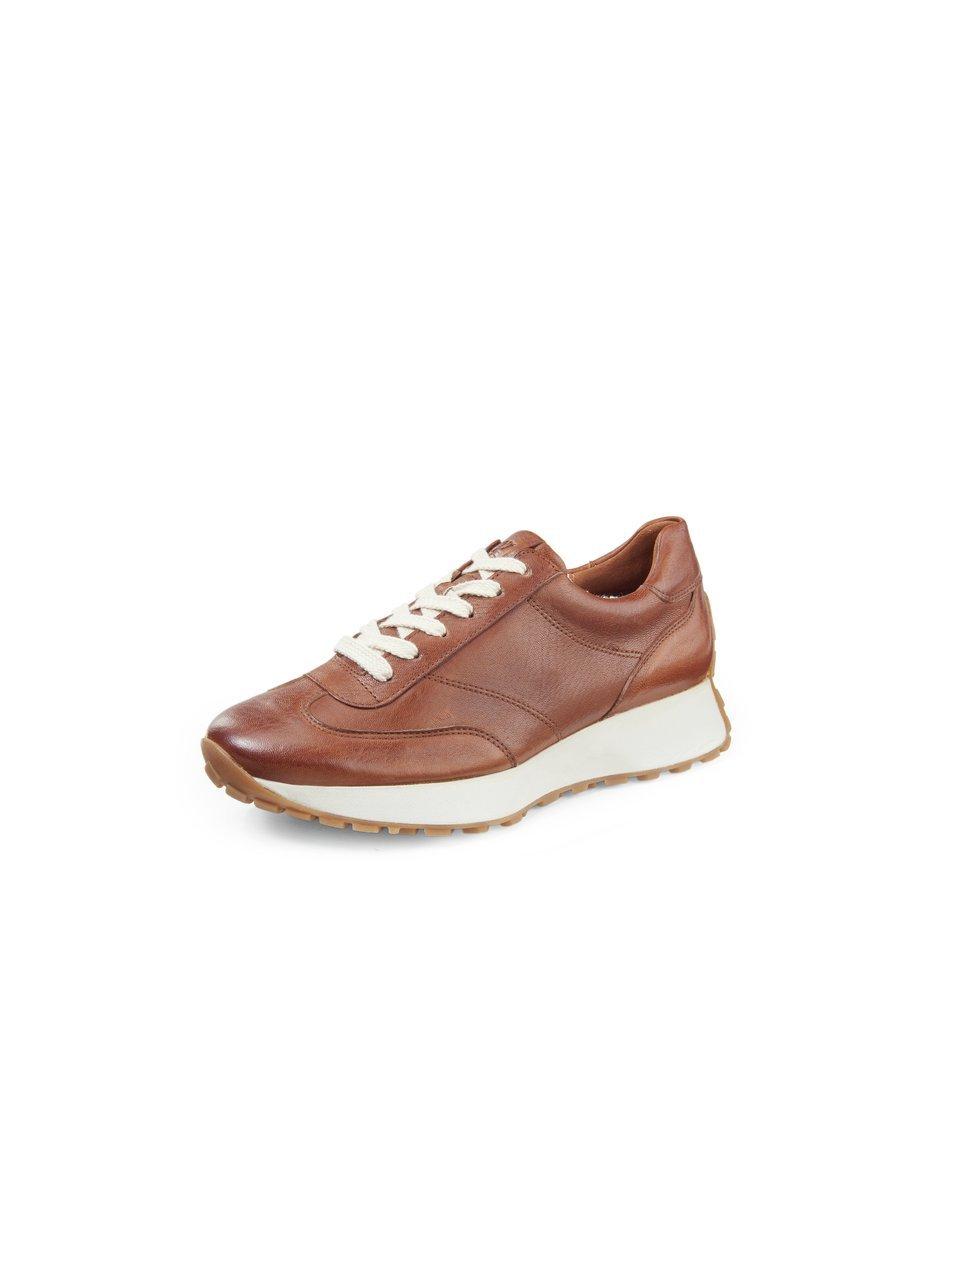 Paul Green - Sneakers in nappa leather - brown